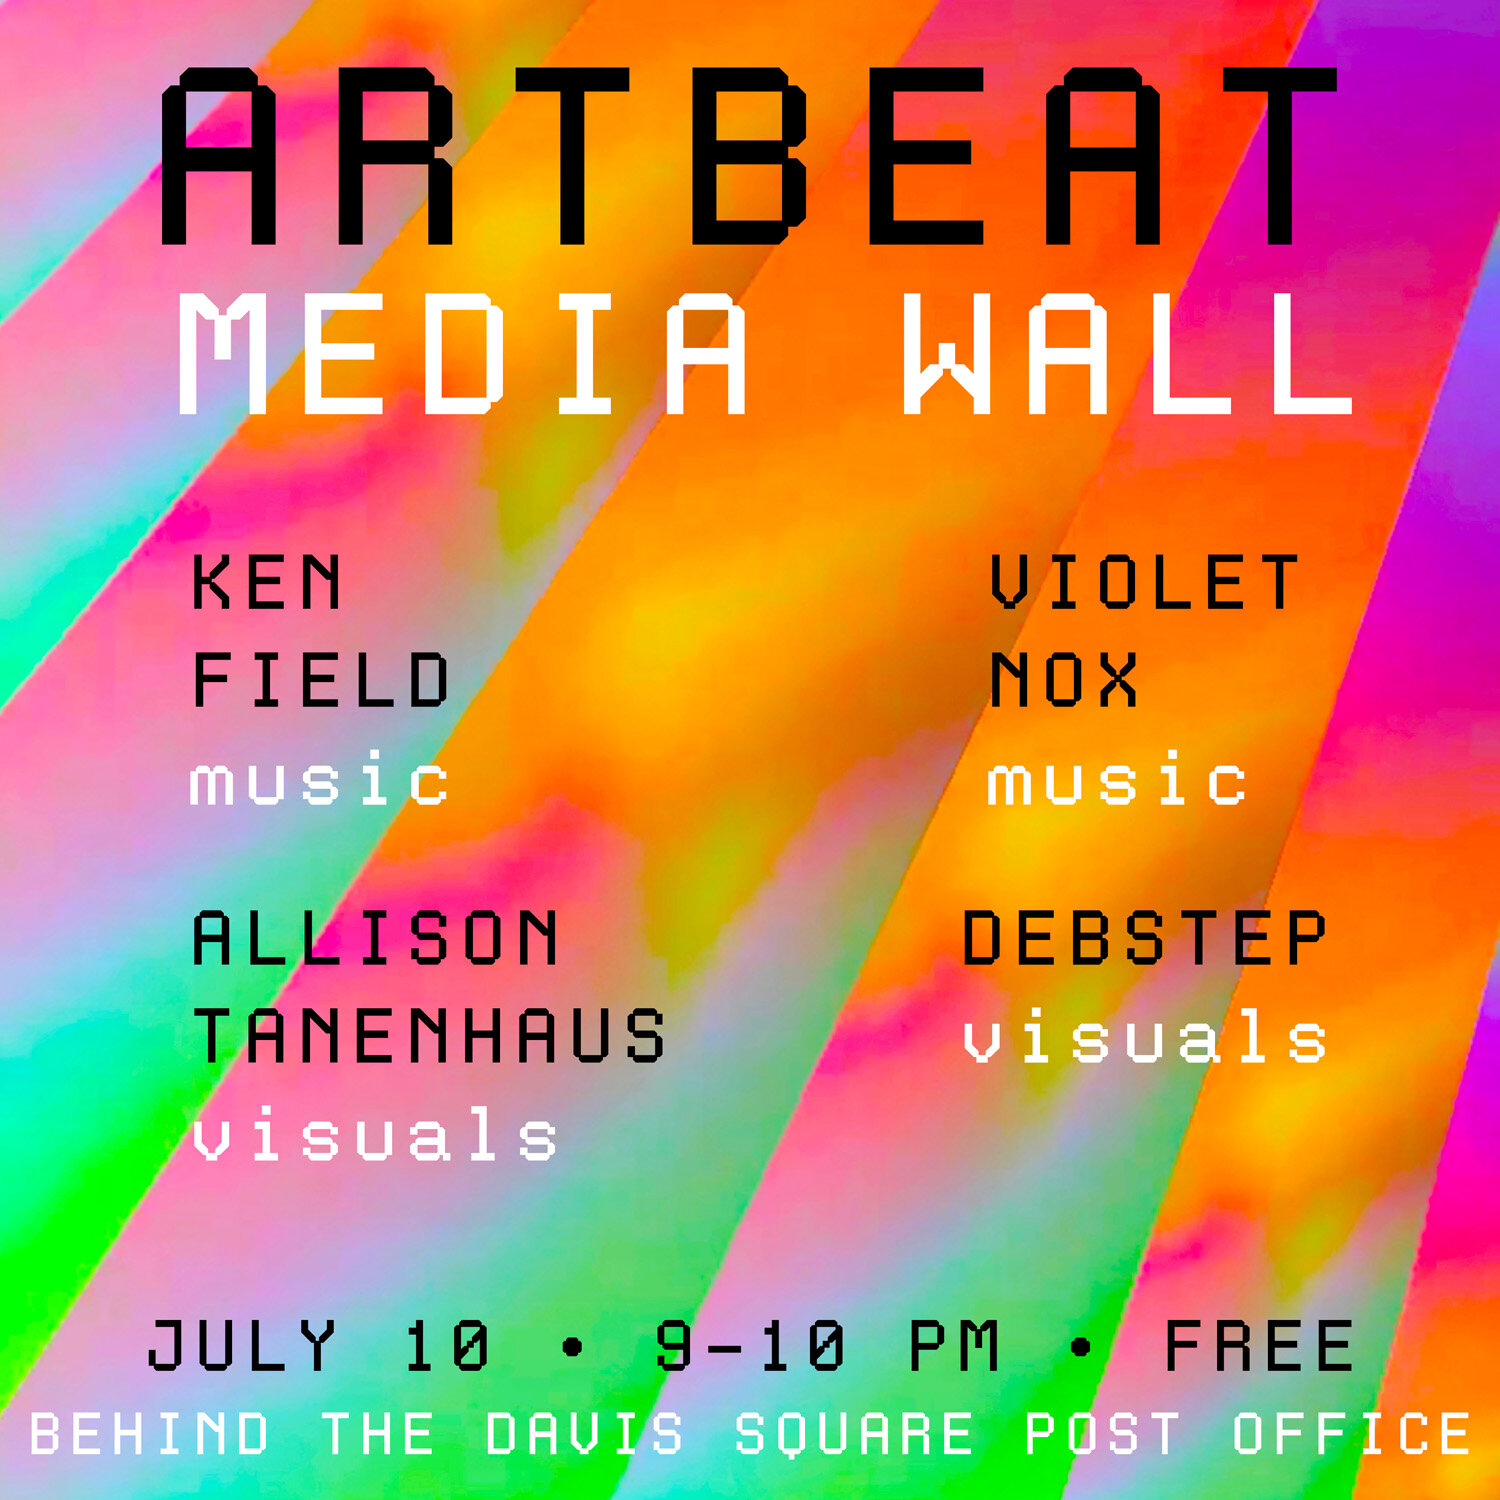 ArtBeat_Promo_revised_saturated_reduced size.jpg